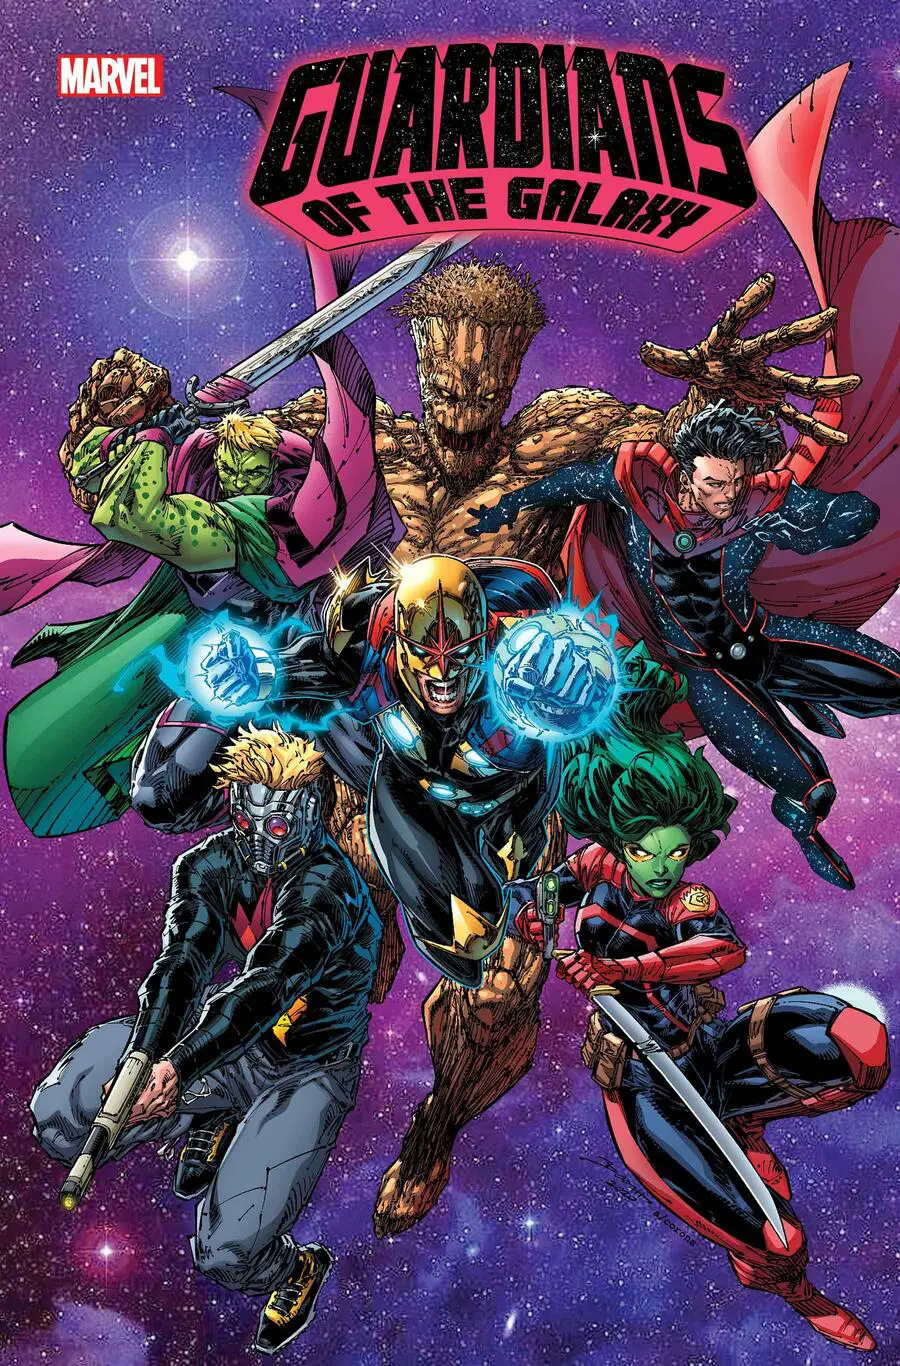 GUARDIANS OF THE GALAXY #13 cover by Brett Booth